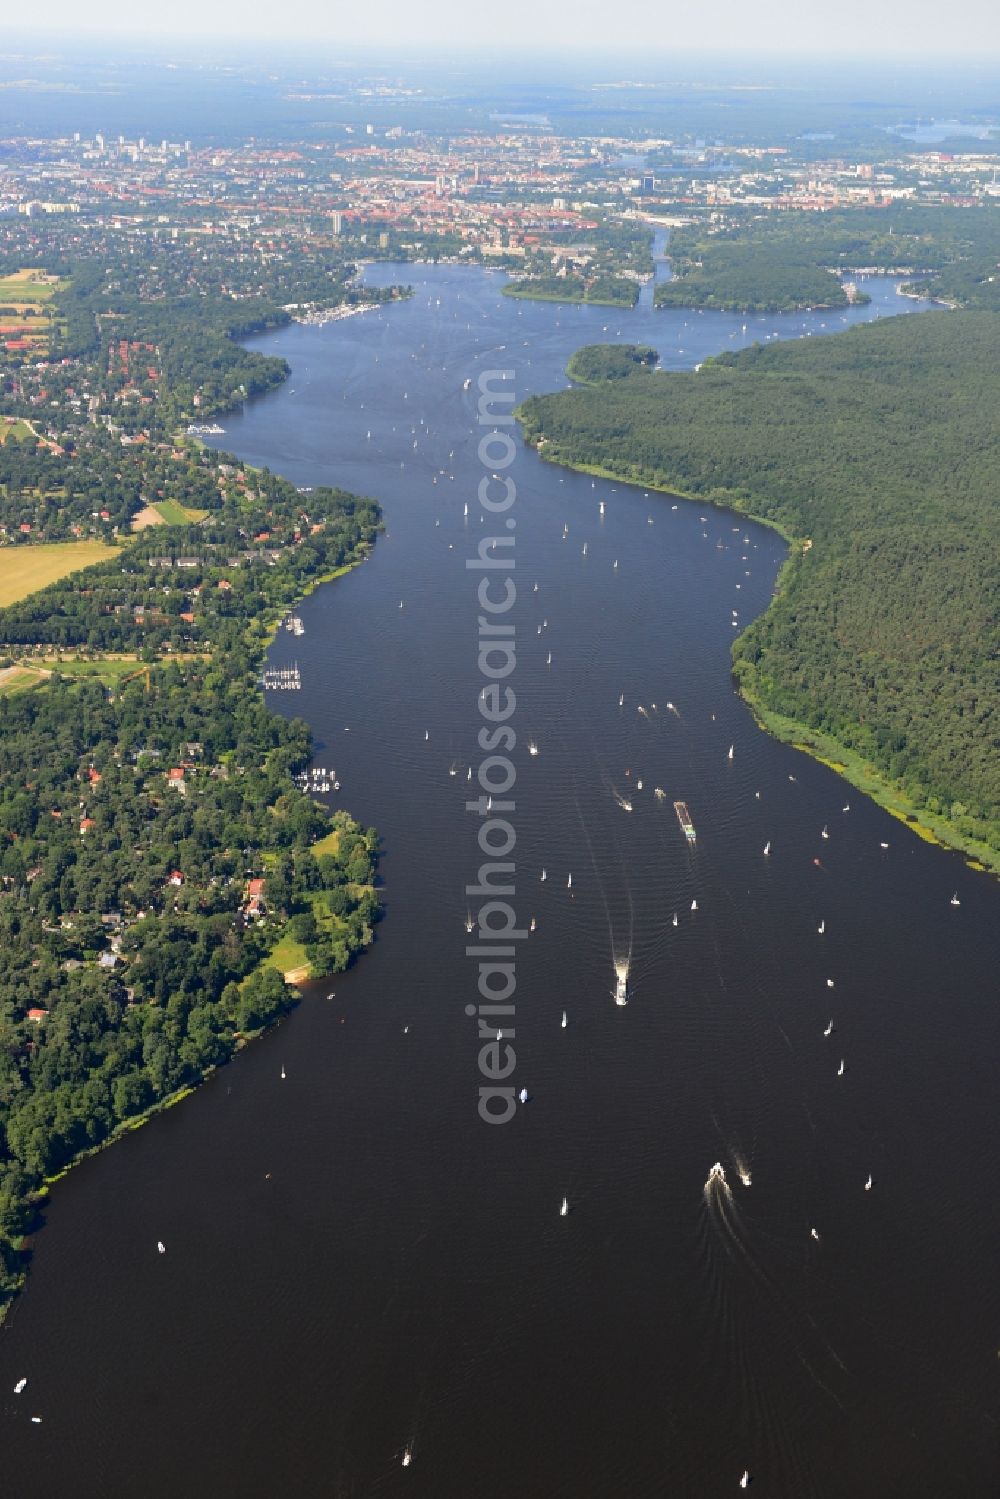 Berlin from the bird's eye view: Landscape along the river banks of the Wannsee Grunewald in the district of Charlottenburg-Wilmersdorf in Berlin